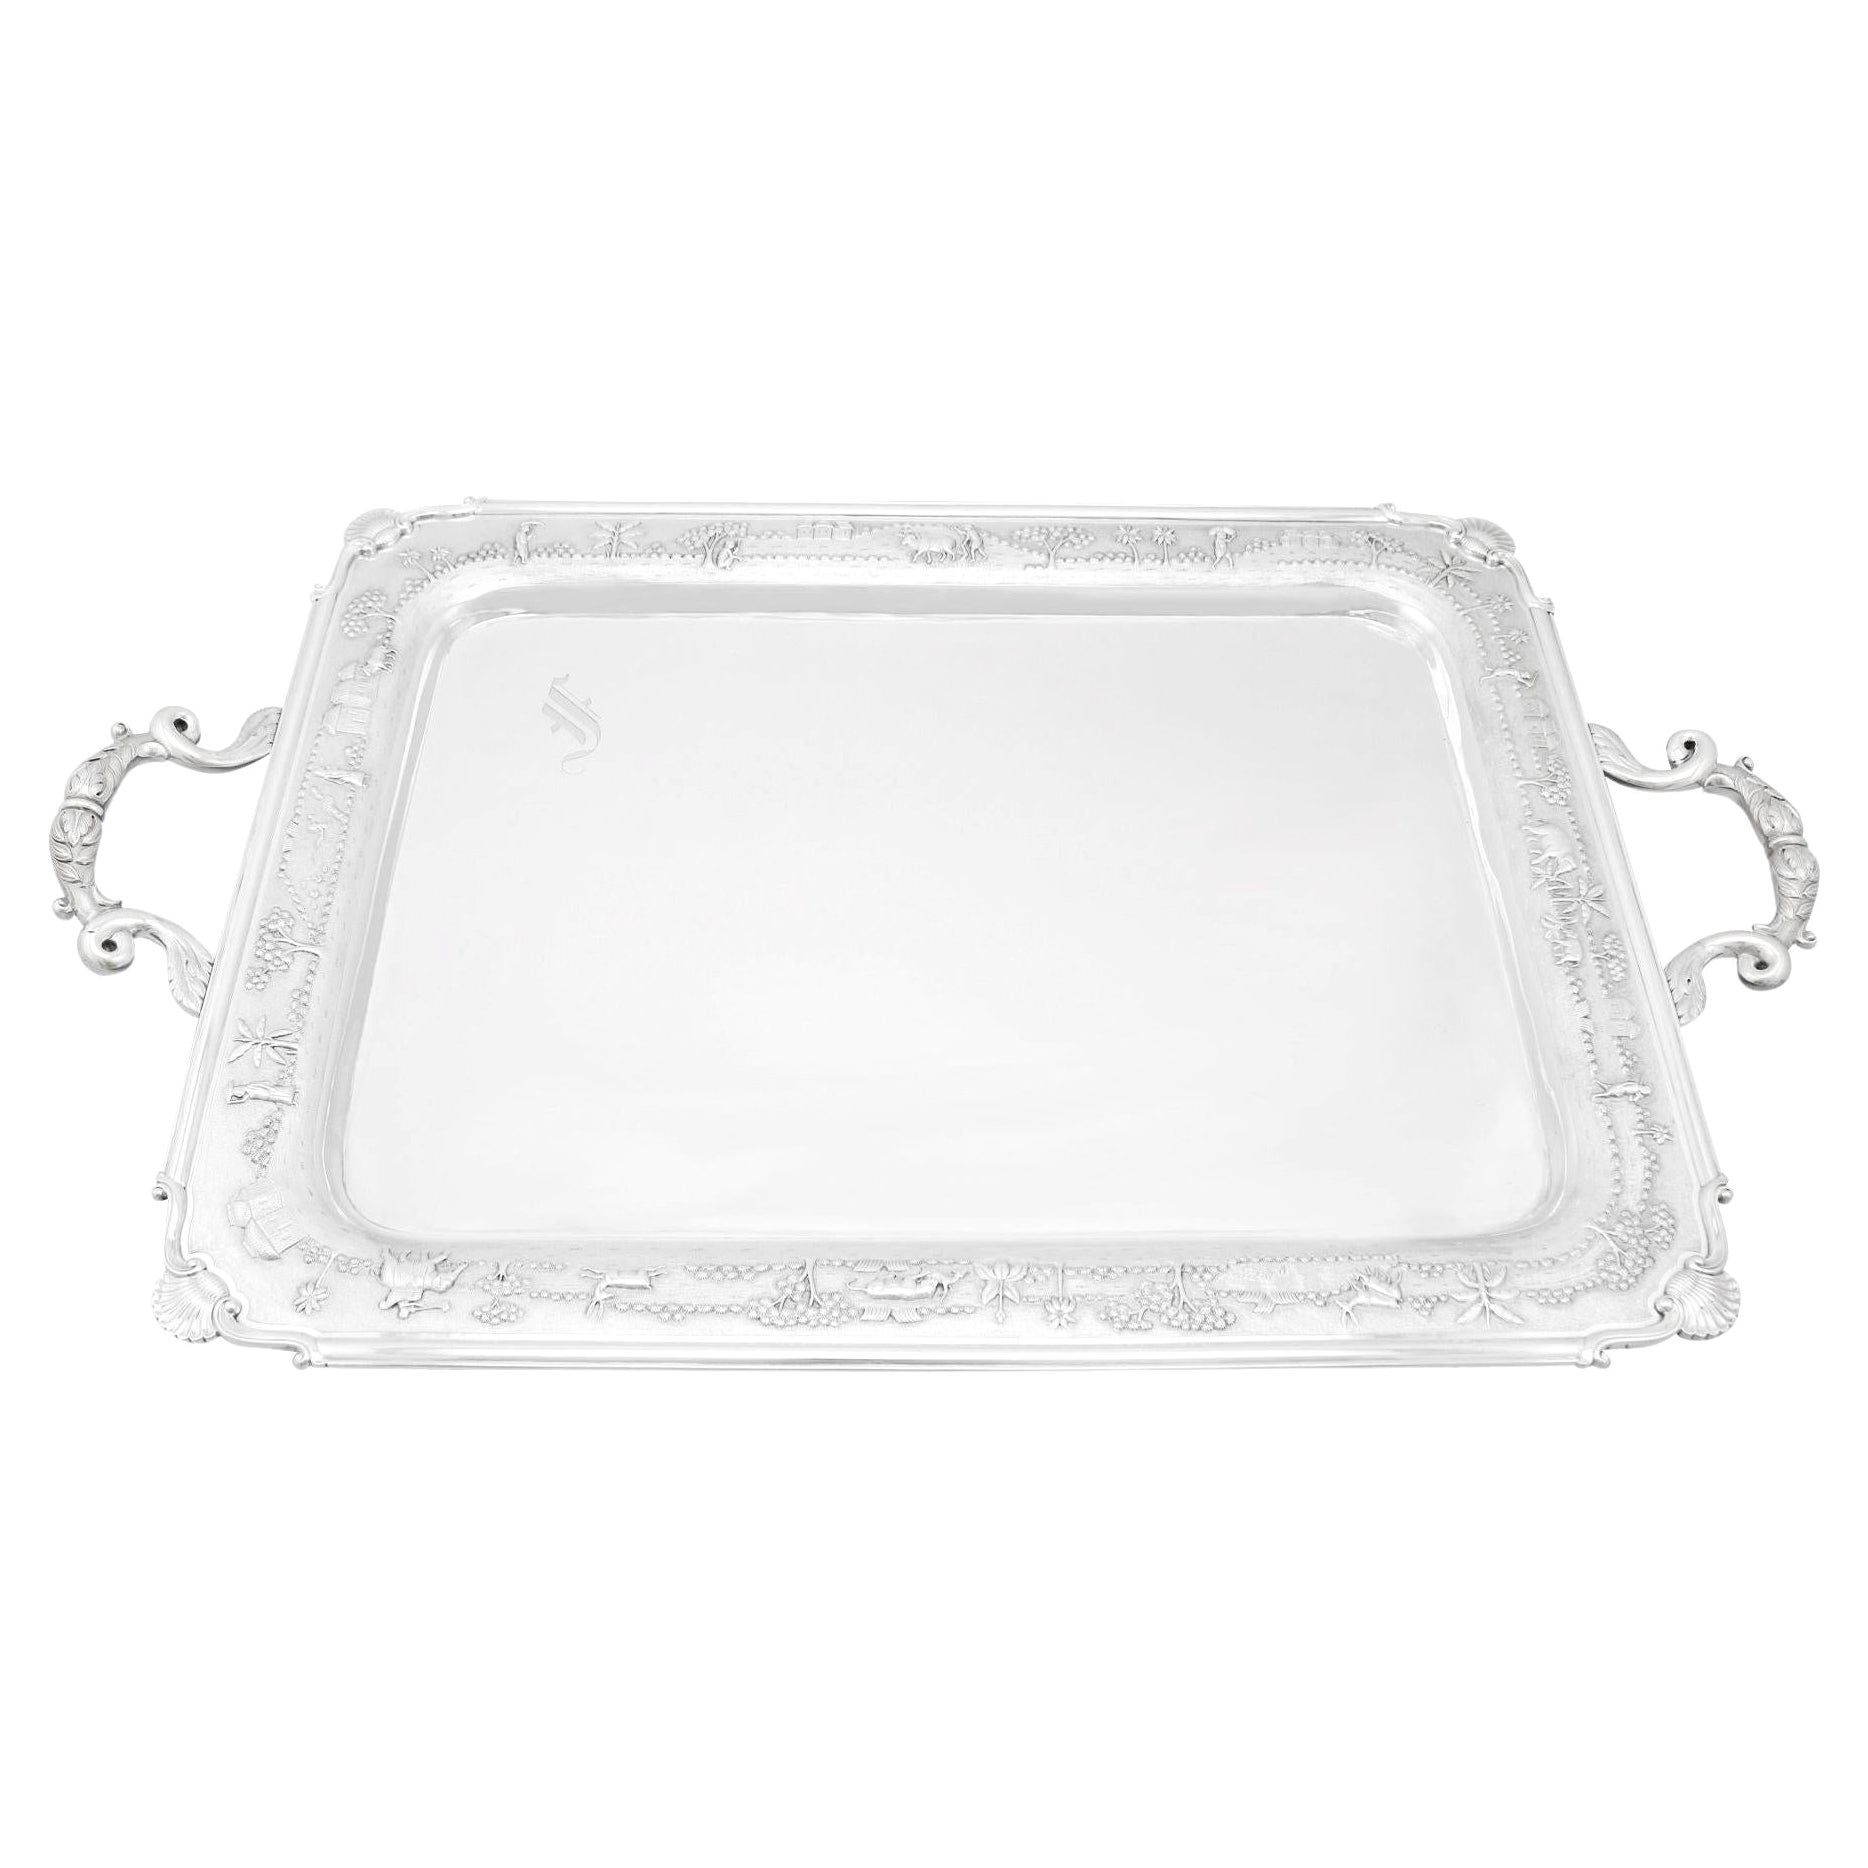 Antique 1880s Indian Silver Two-Handled Tea Tray For Sale